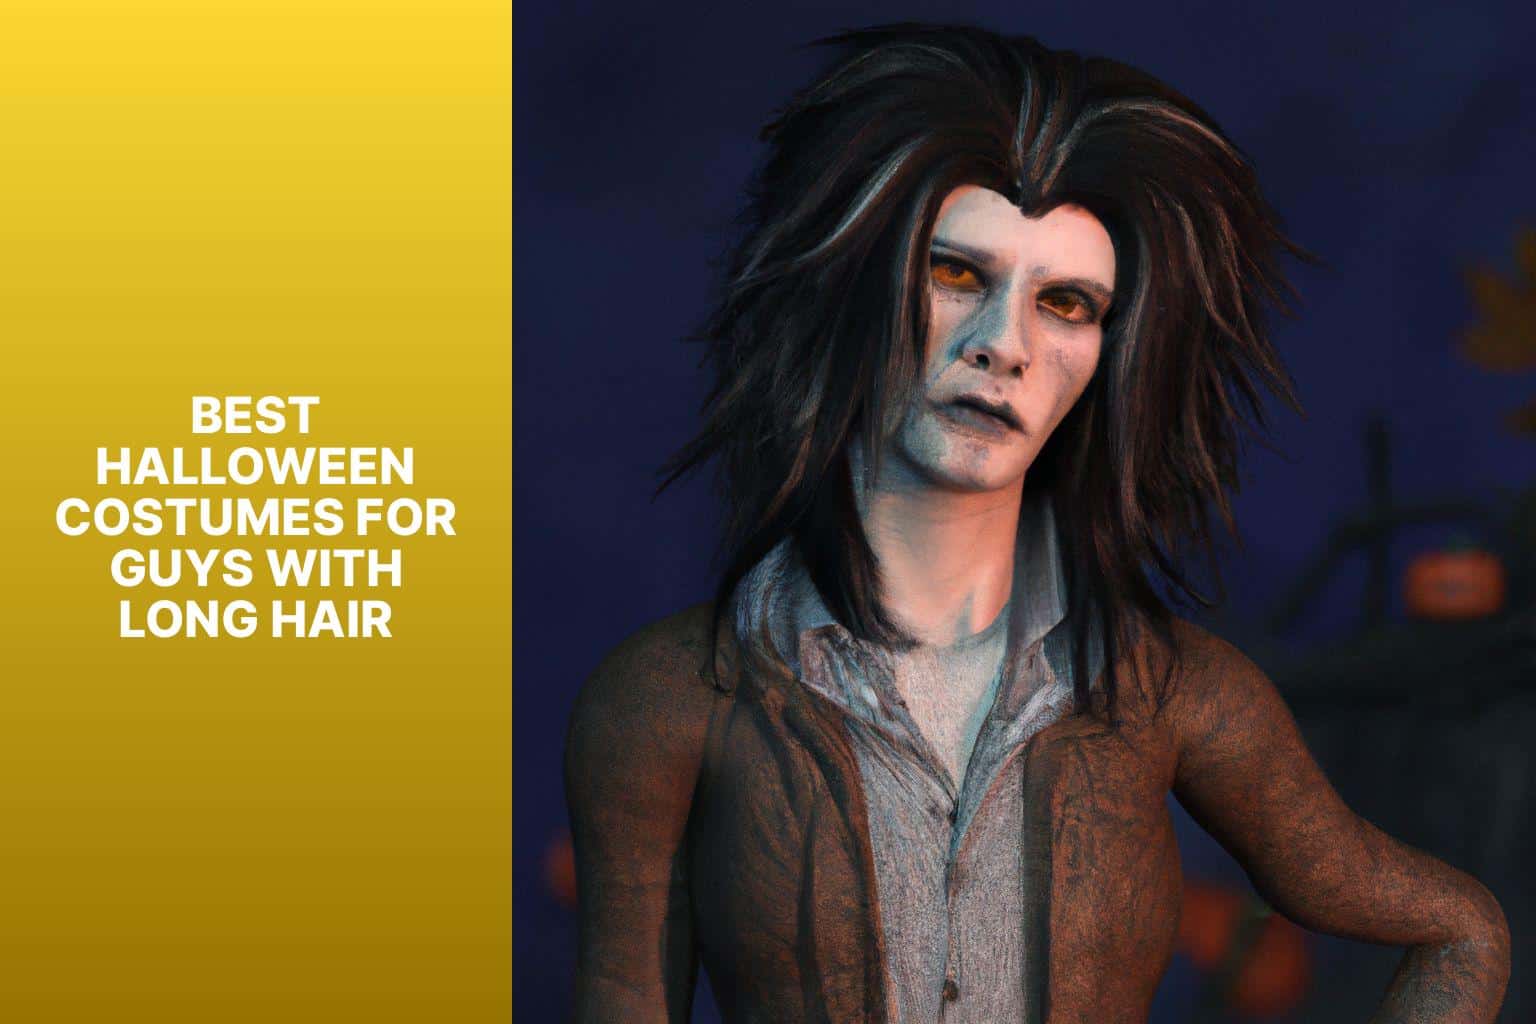 Best Halloween Costumes for Guys with Long Hair - best halloween costumes for guys with long hair 